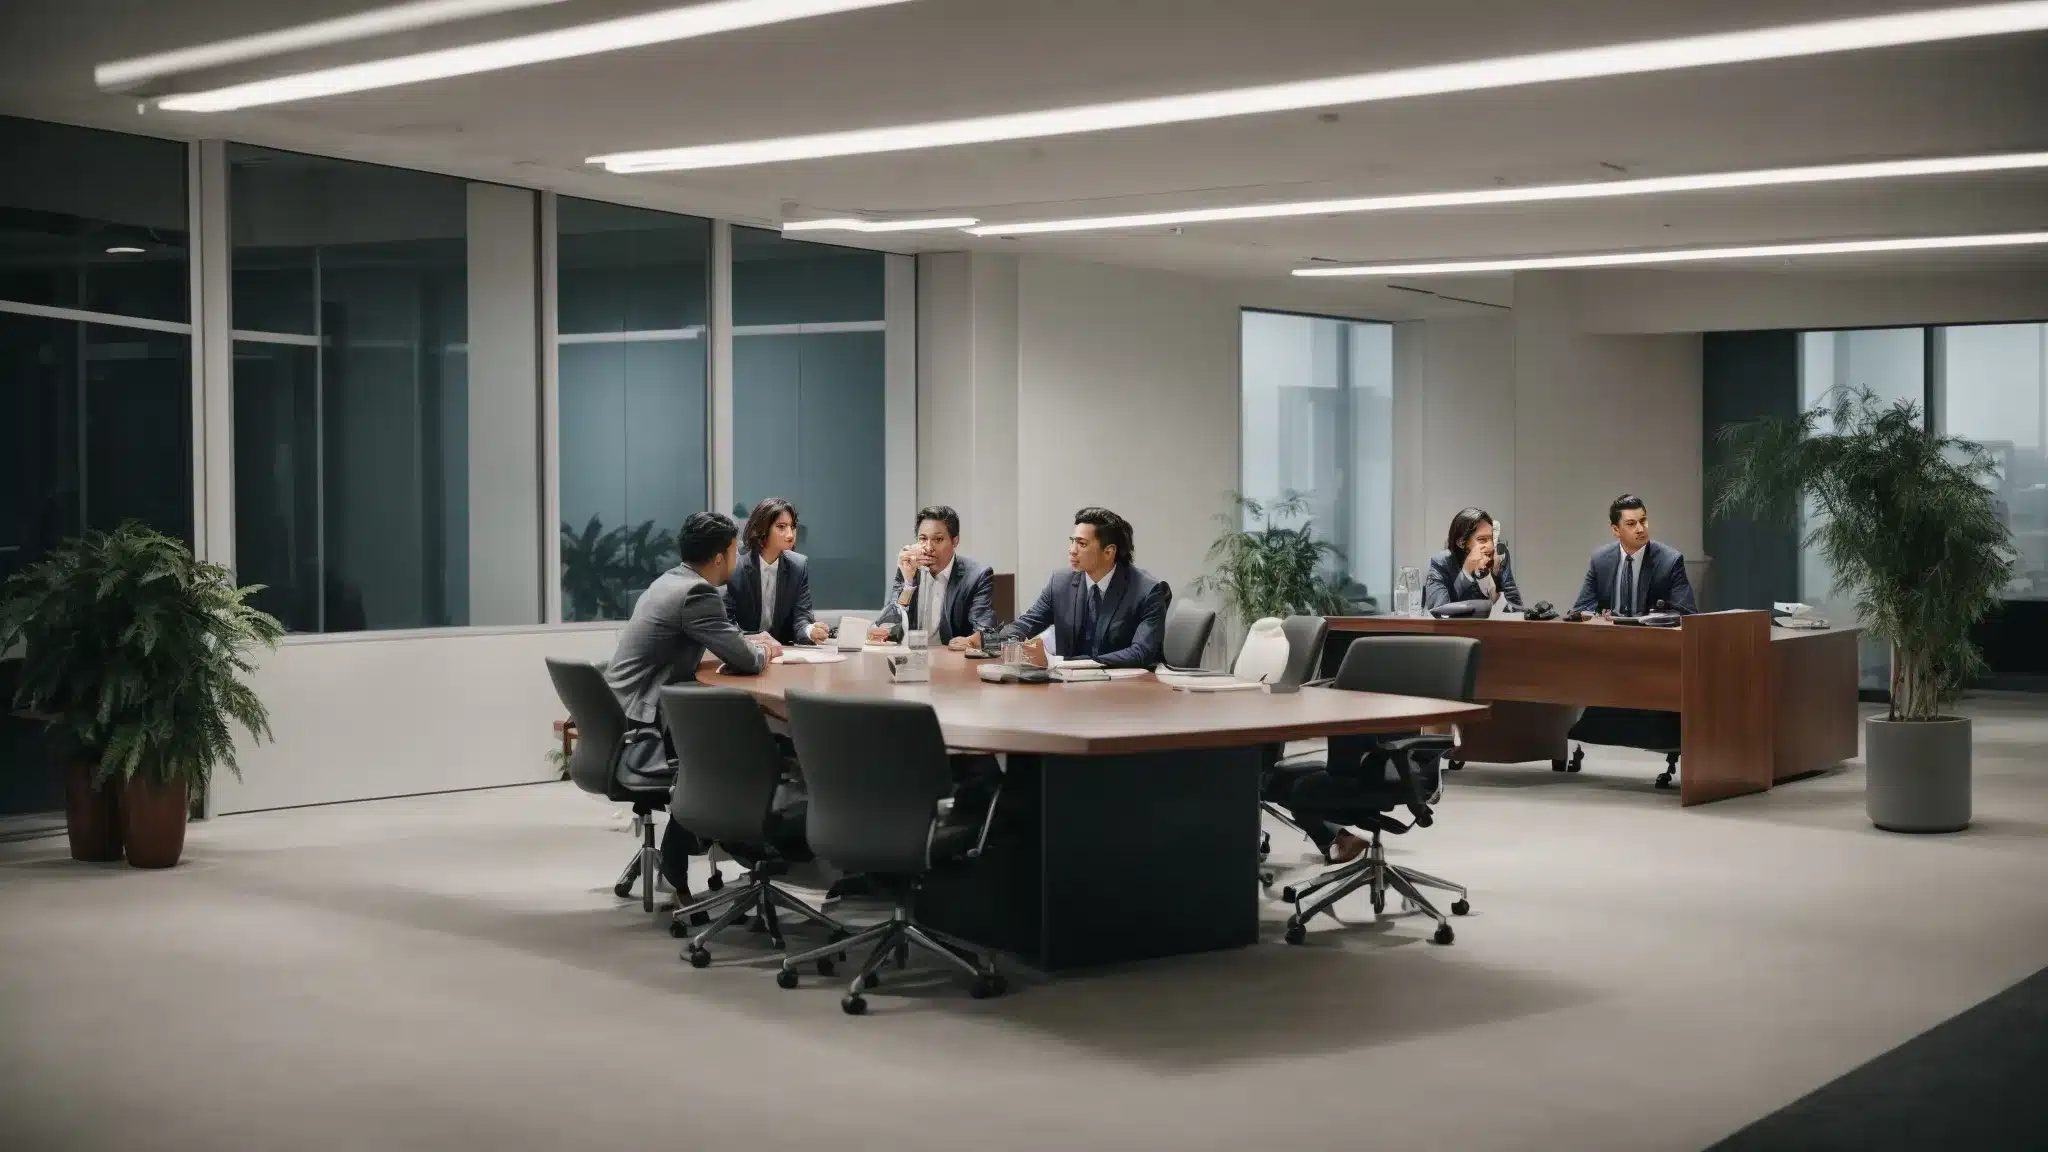 A Group Of Professionals Gather Around A Conference Table, Reviewing Health And Safety Policies In A Well-Lit Office.